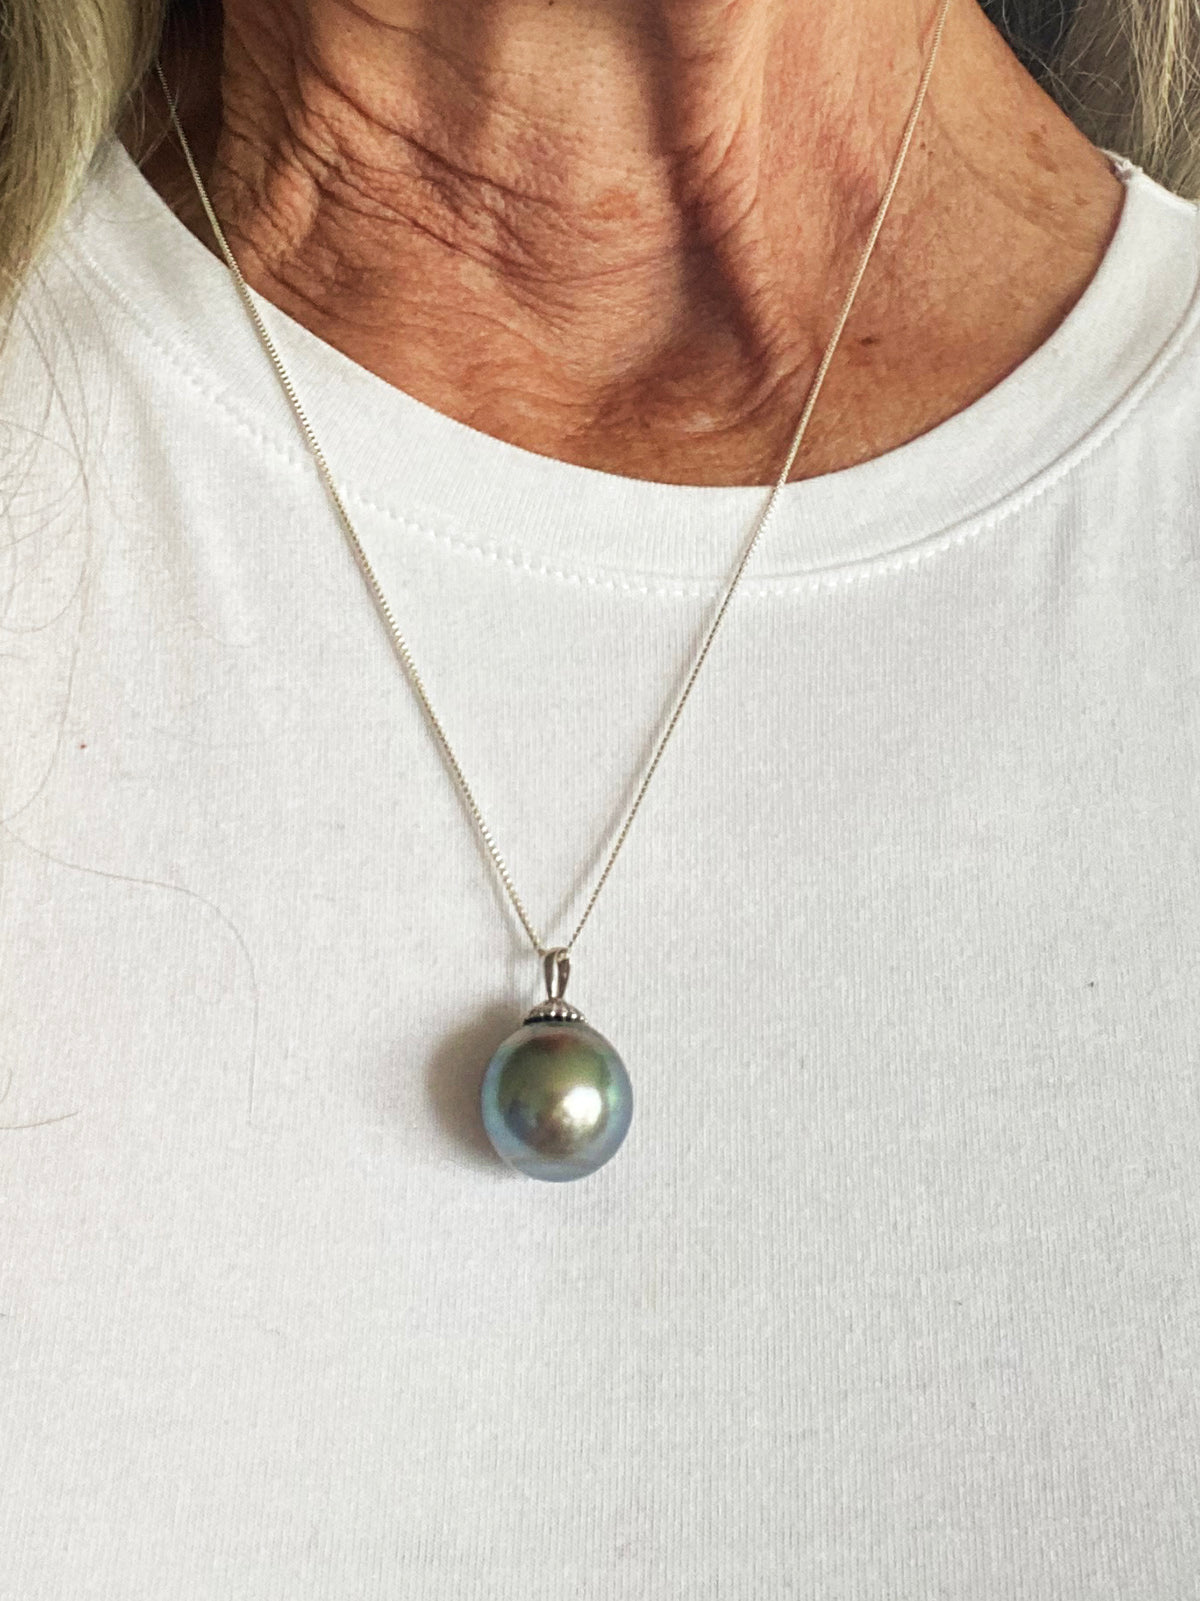 16mm Round Silvery Bronze Tahitian Pearl Pendant on 14k White Gold with Sterling Chain by Linda Queally